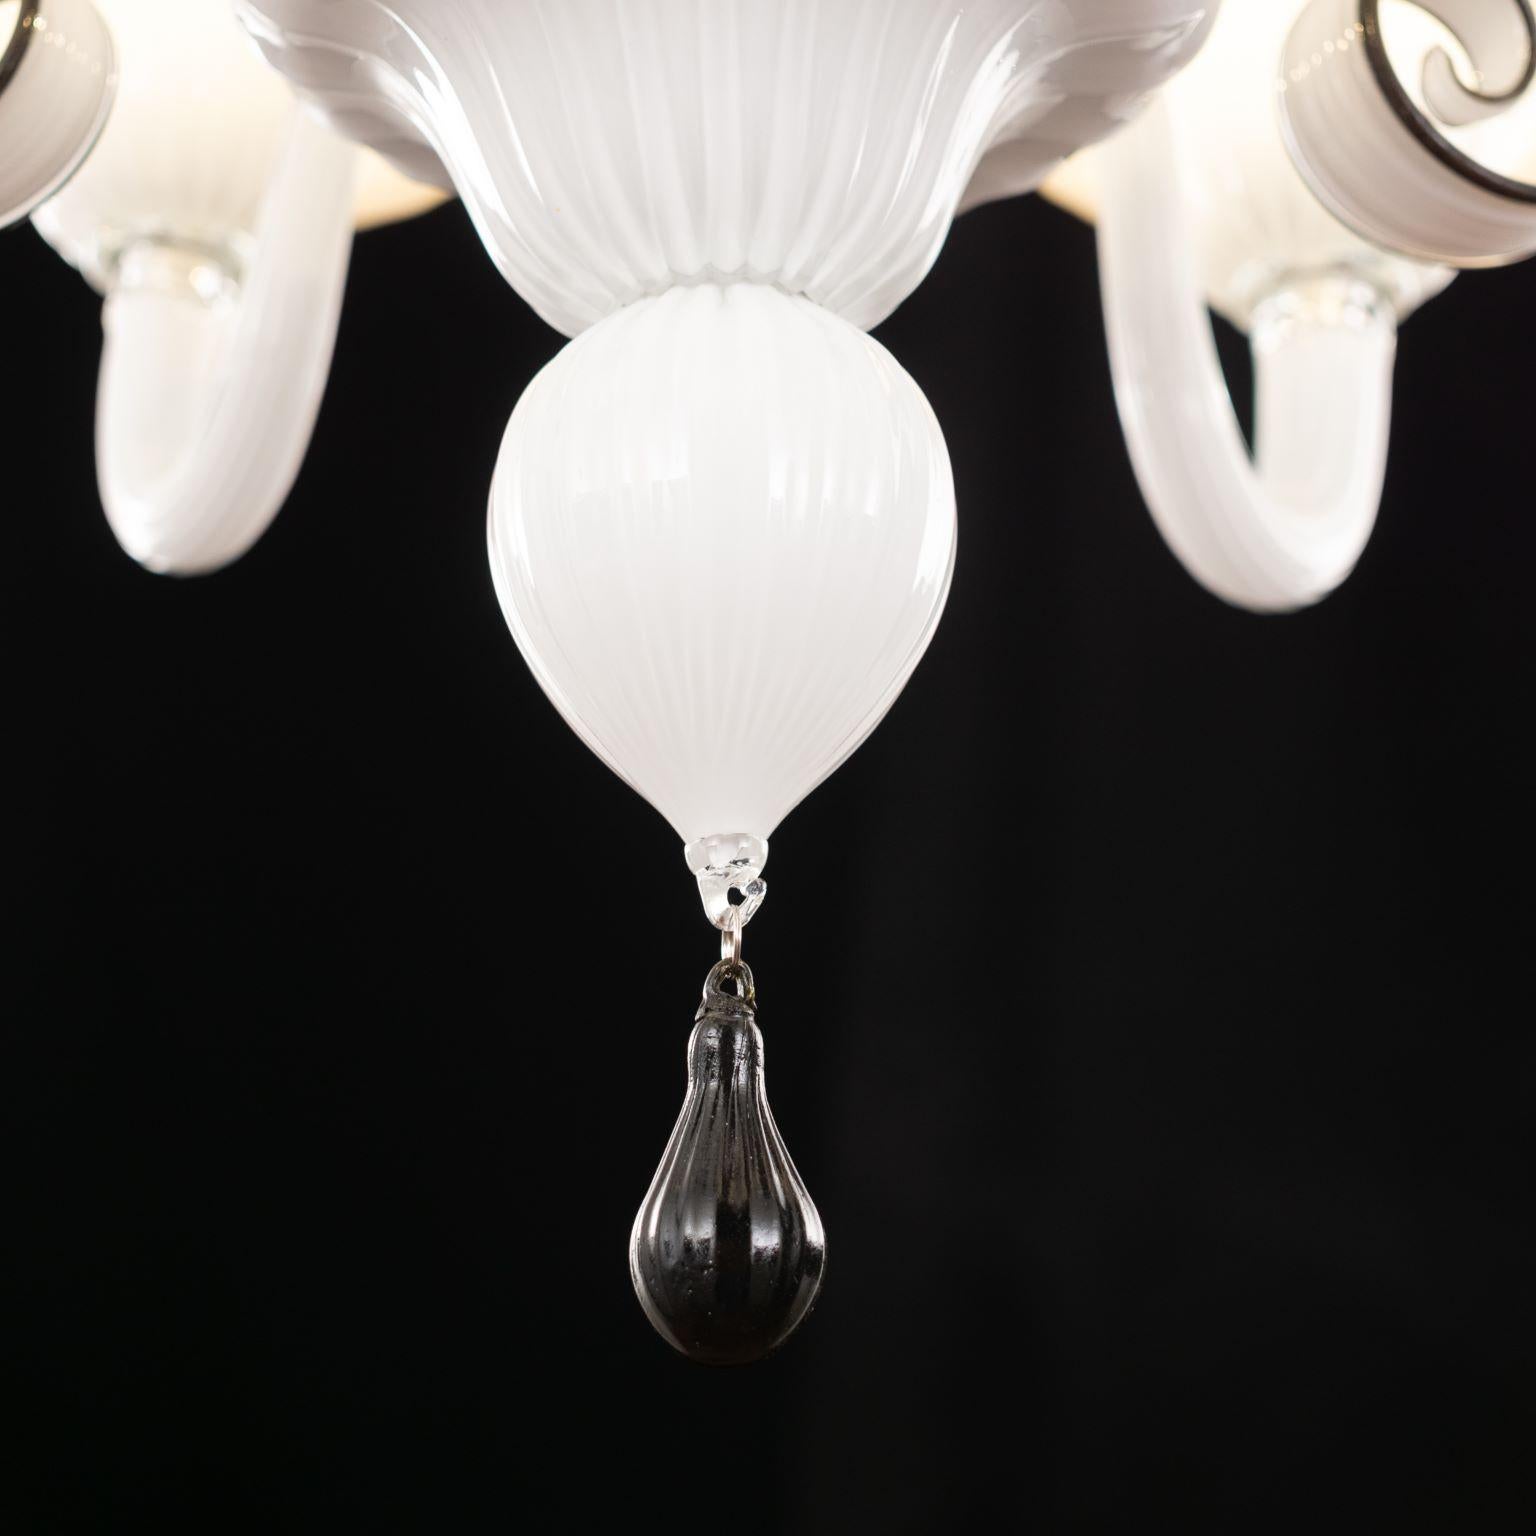 Chandelier 5 Arms White Blown Artistic Murano Glass, Black Details by Multiforme For Sale 3